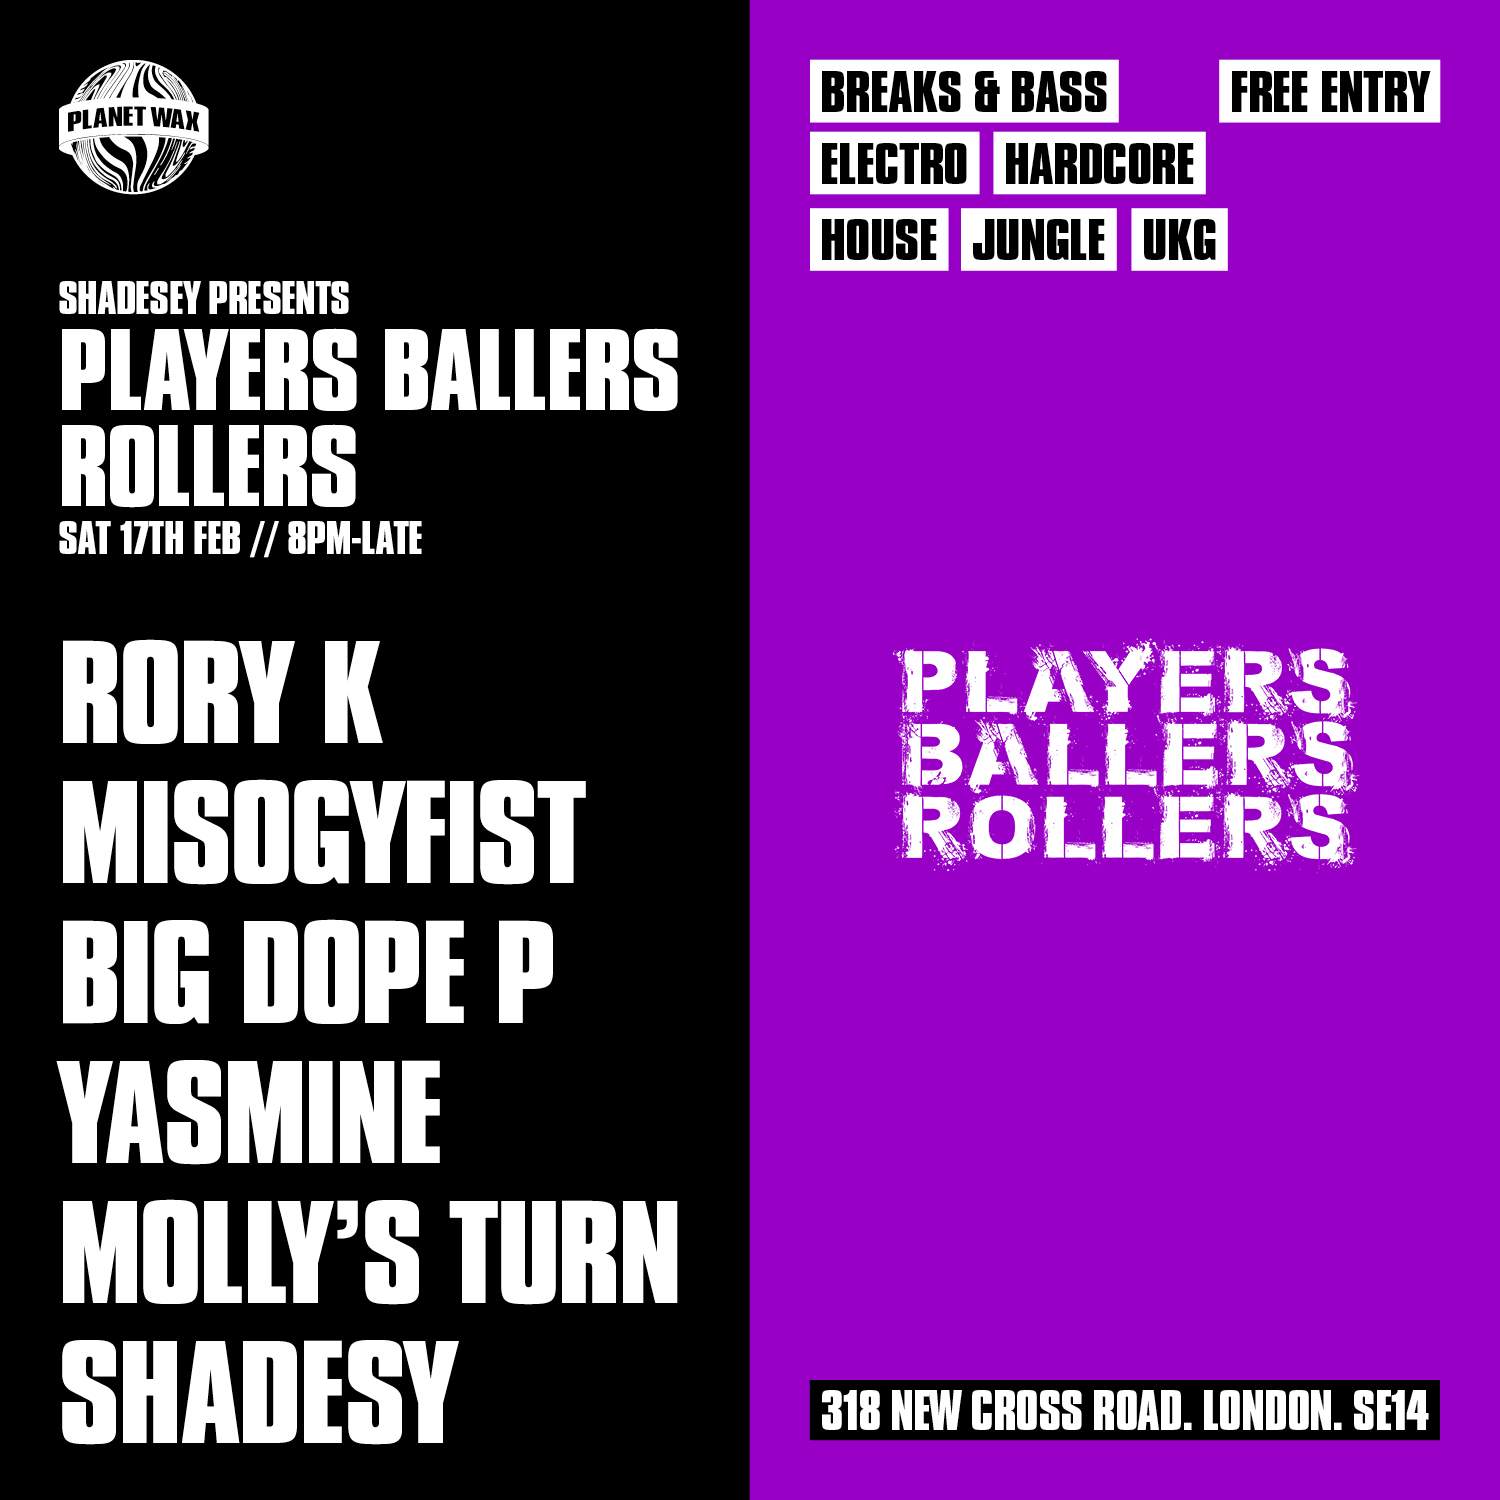 SHADESEY PRESENTS - PLATERS BALLERS ROLLERS - フライヤー表